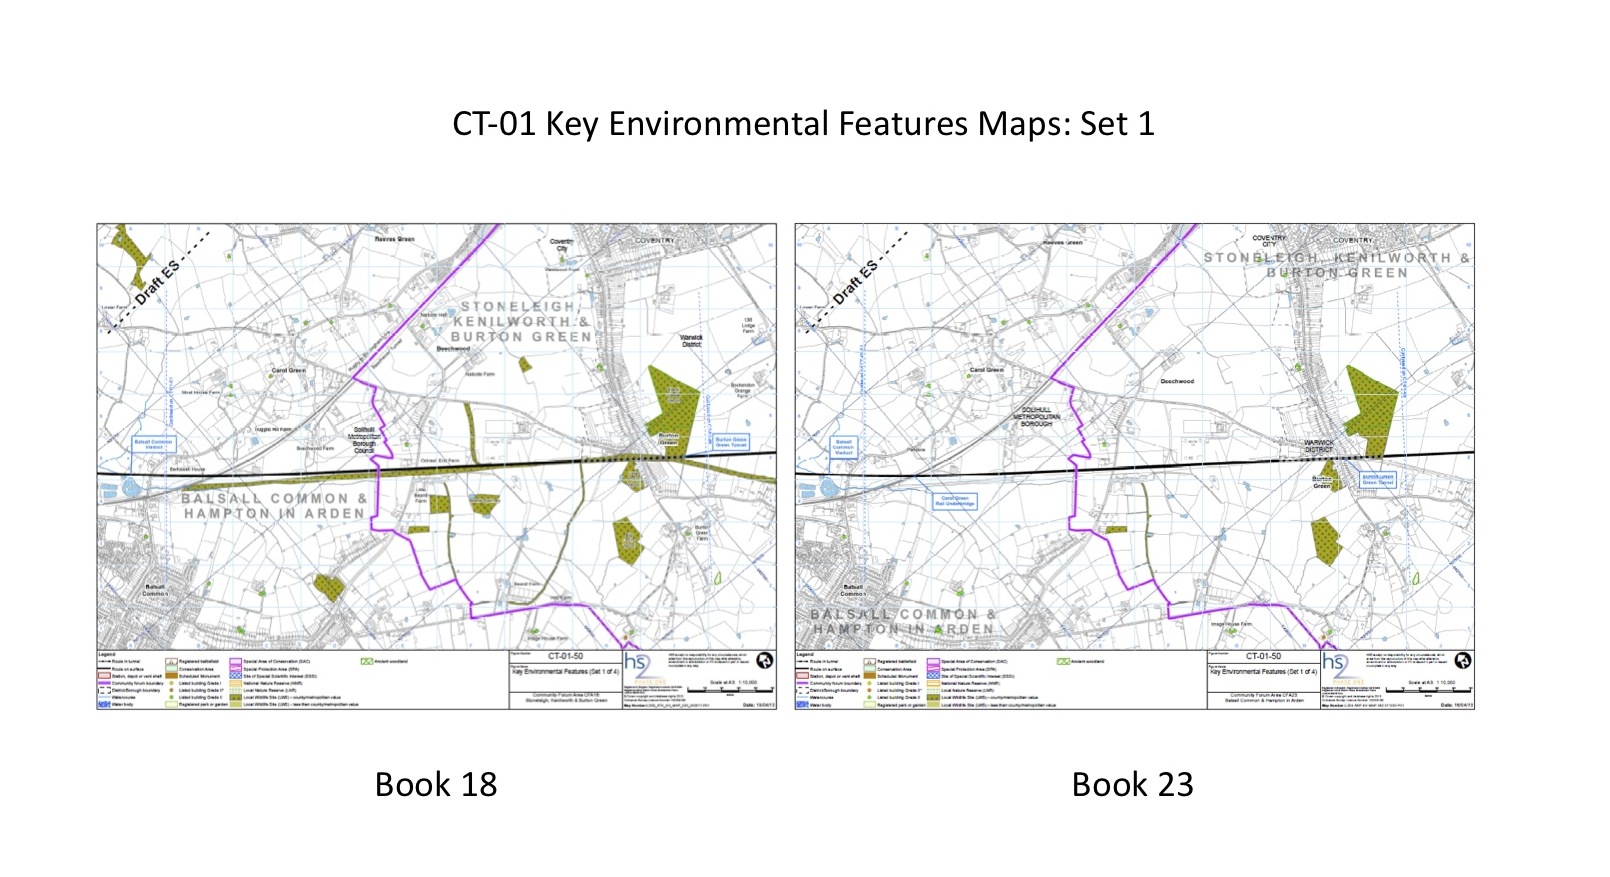 Shows differences in map CT-01-50 in CFA map book 23 and 18